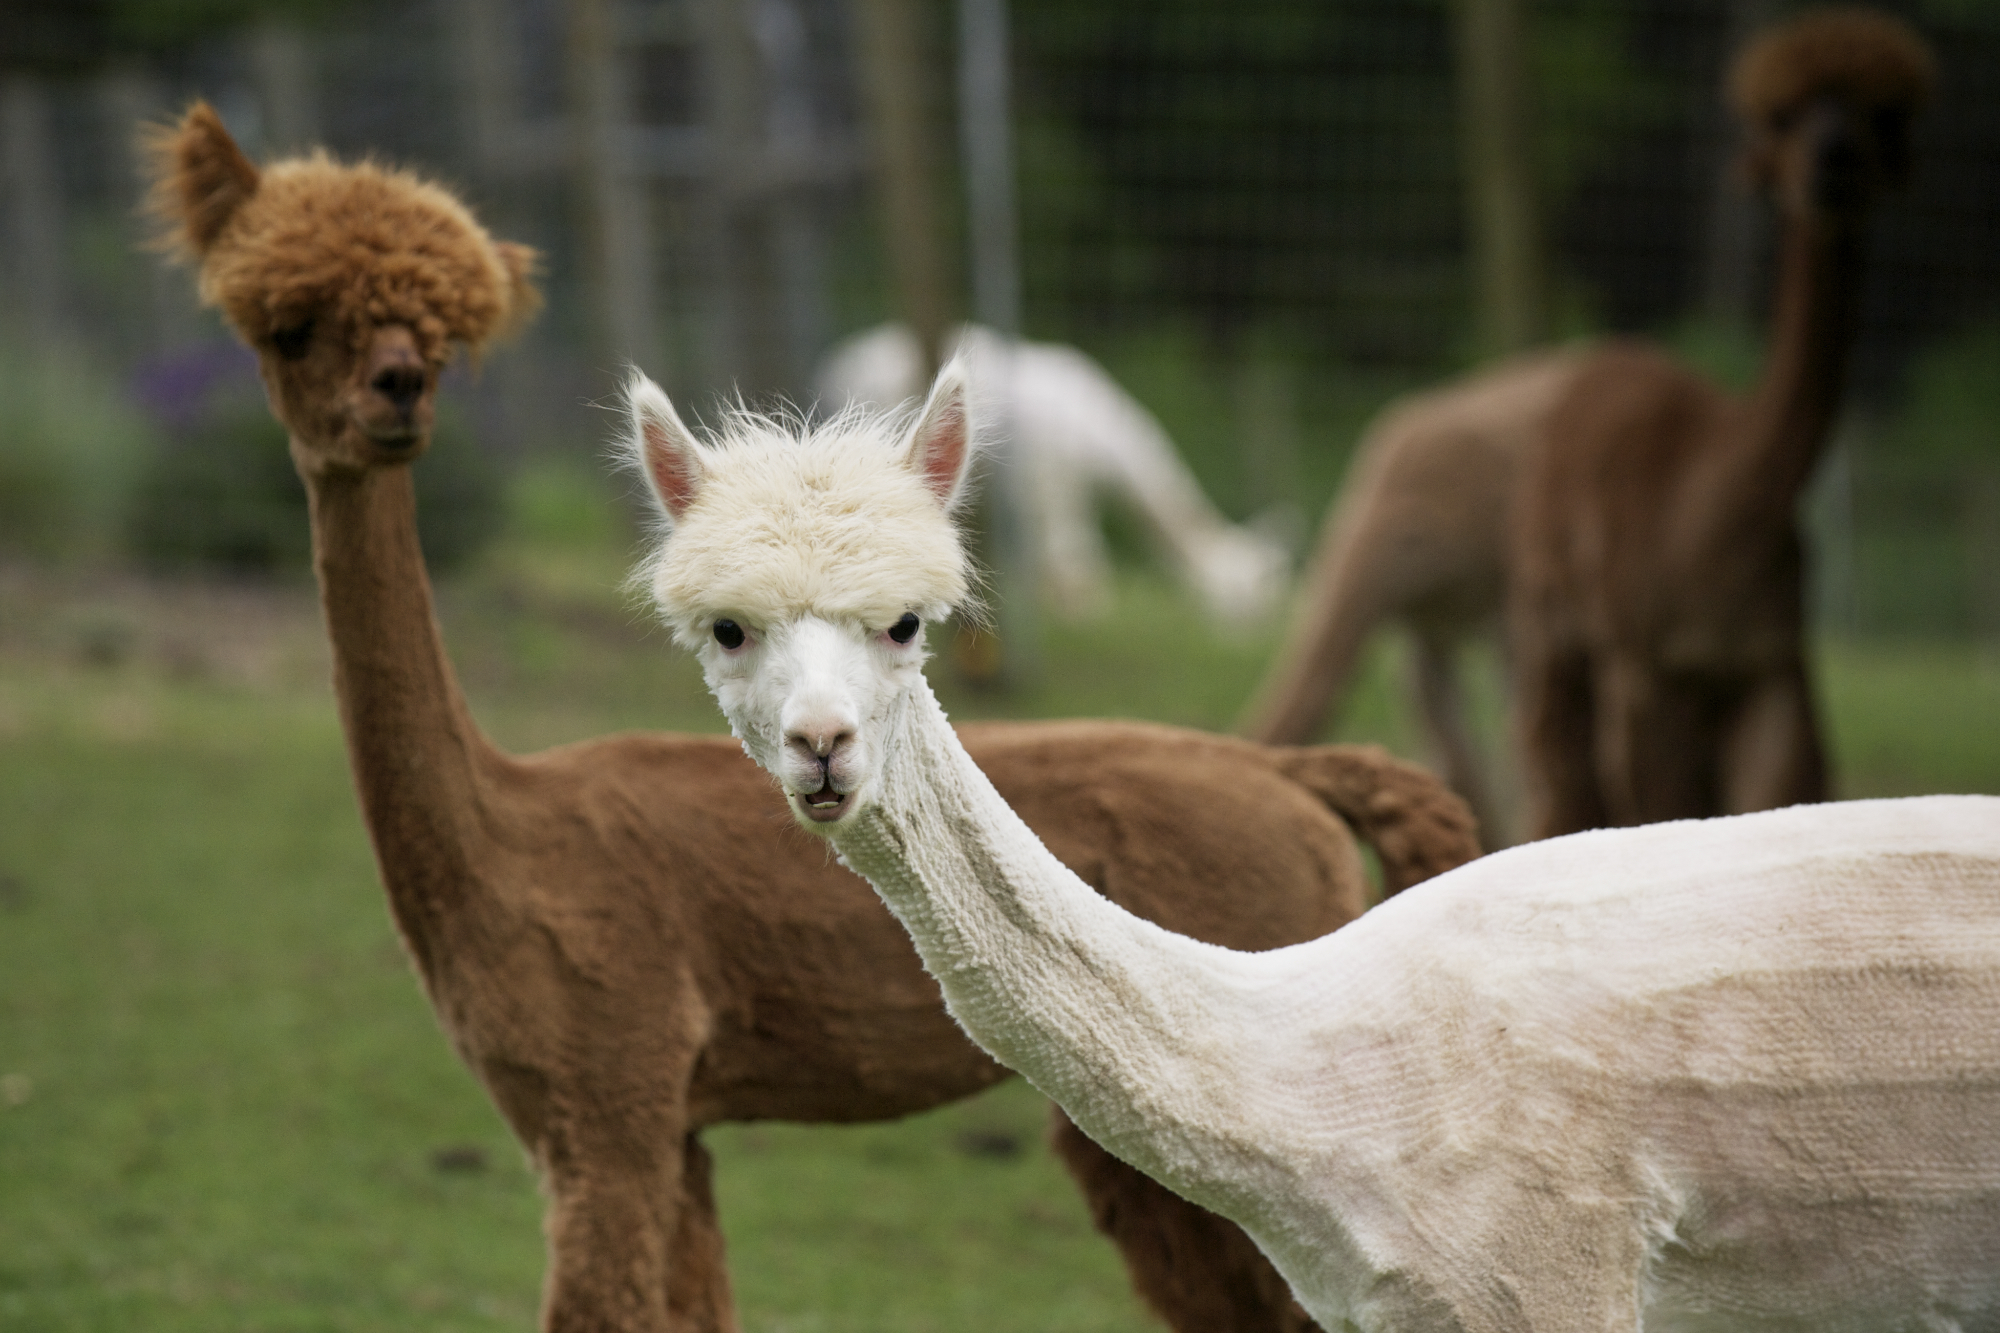 Sheared alpacas at Columbia Mist Alpacas in Woodland. (Steven Lane/The Columbian) Buy this photo